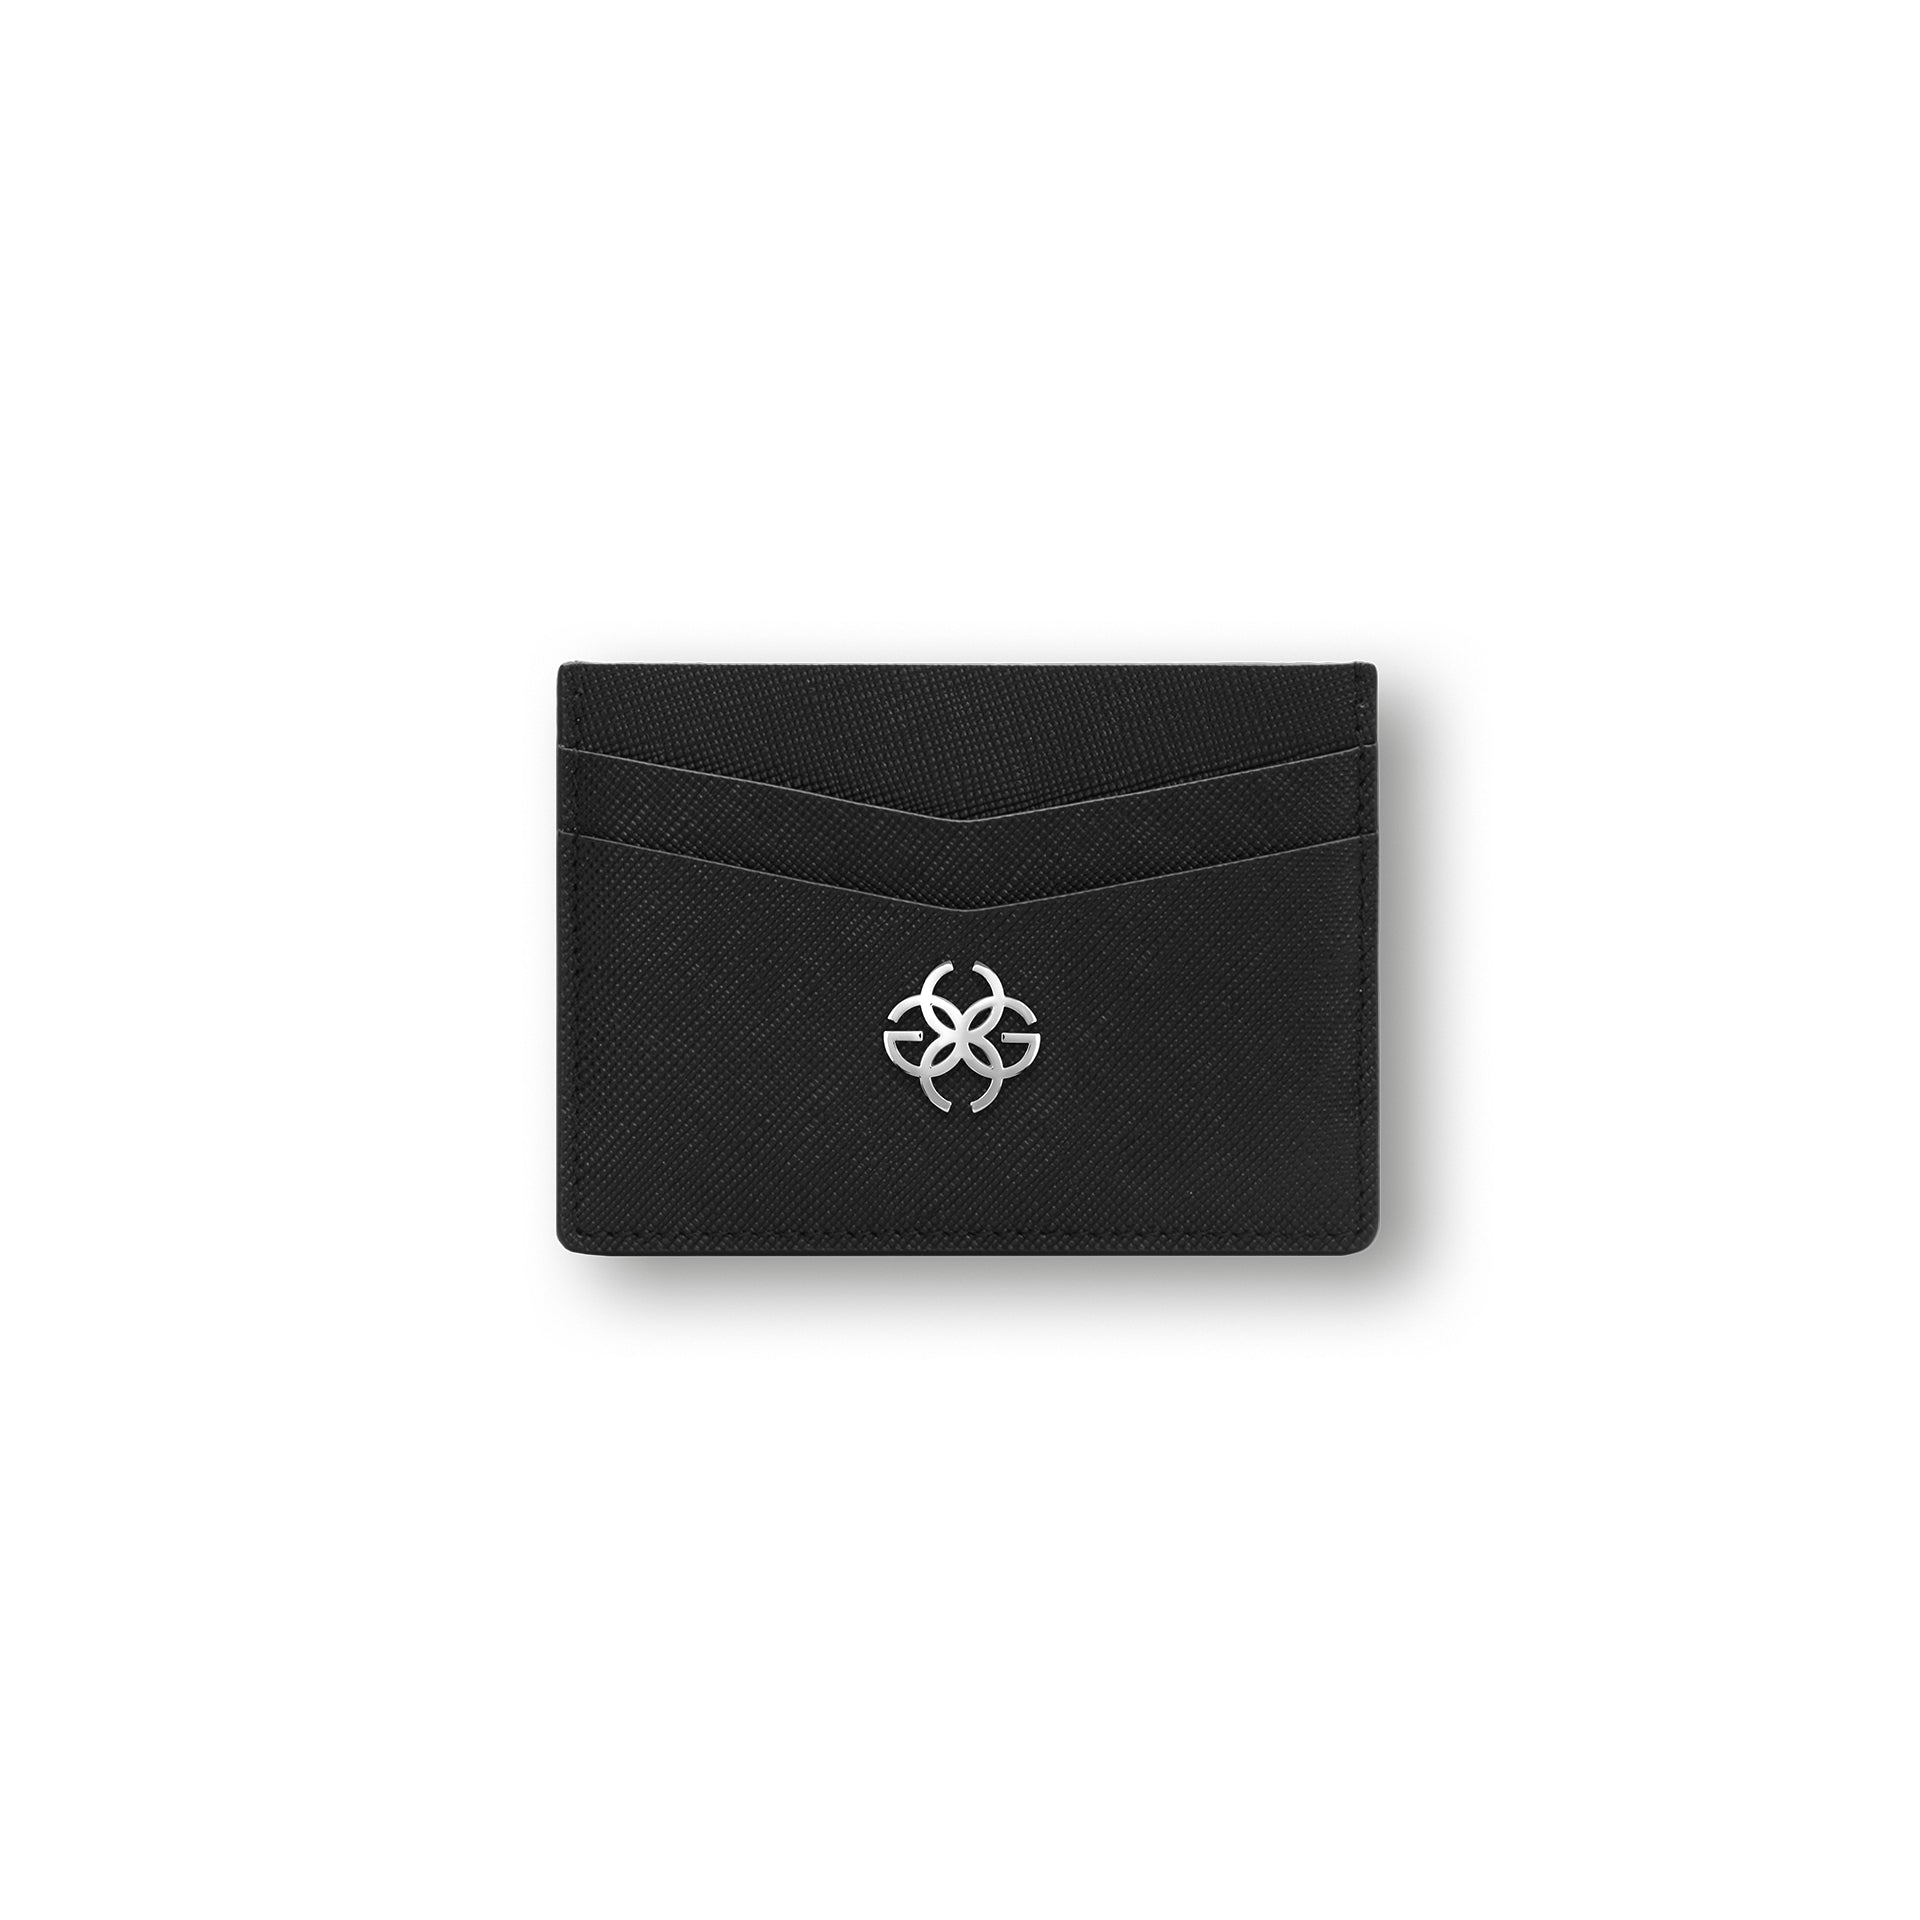 Golden Concept - Leather Accessories - Card Holder (Saffiano Leather)